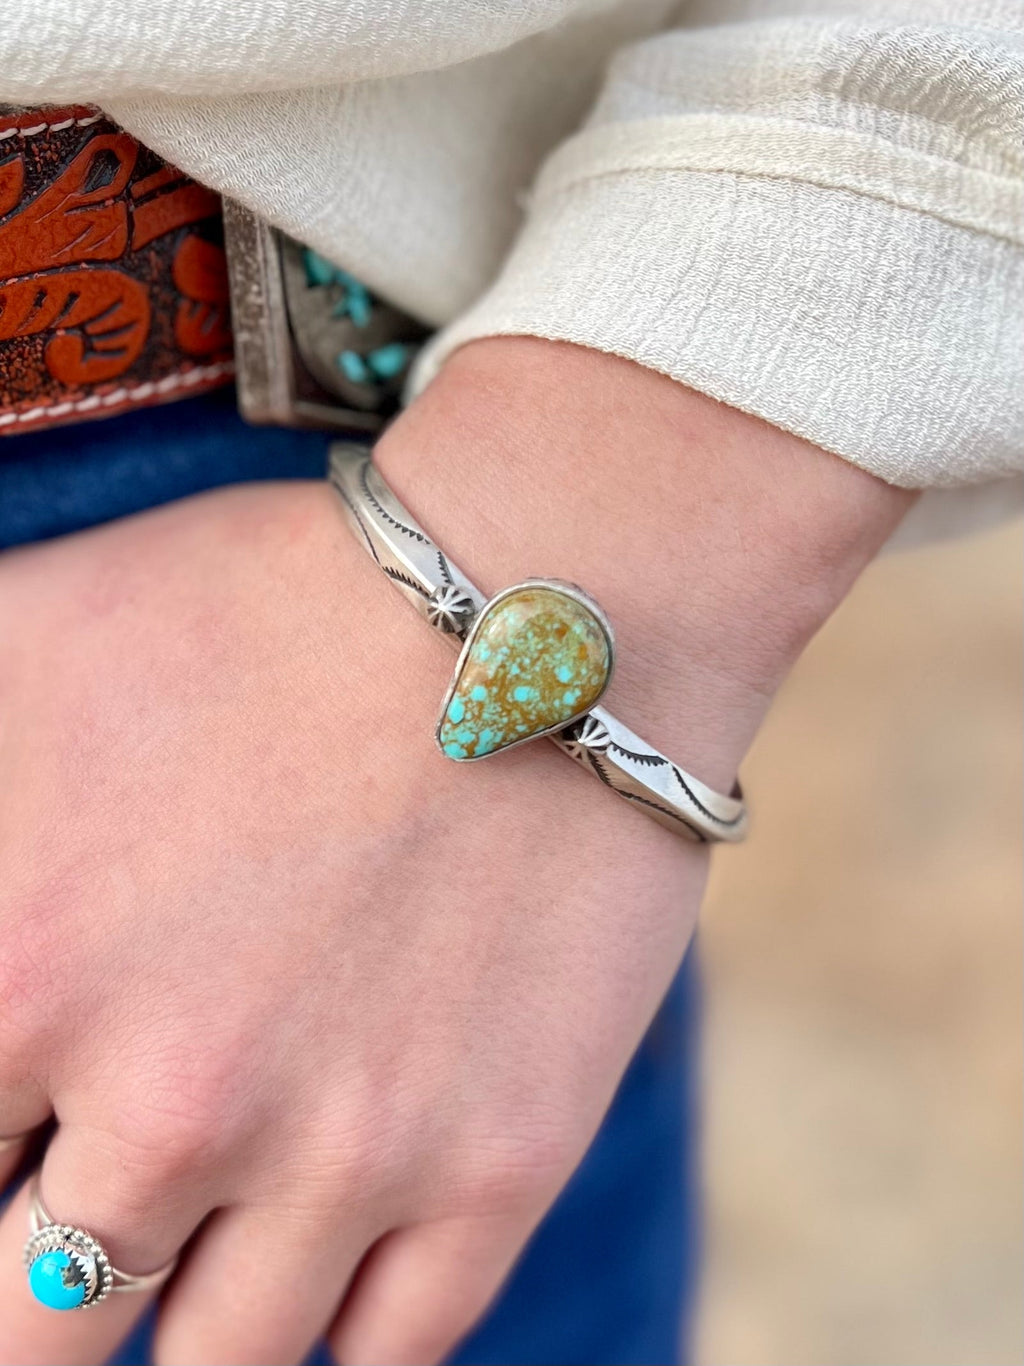 Married to Turquoise Navajo Sterling Silver Cuff Bracelet | gussieduponline